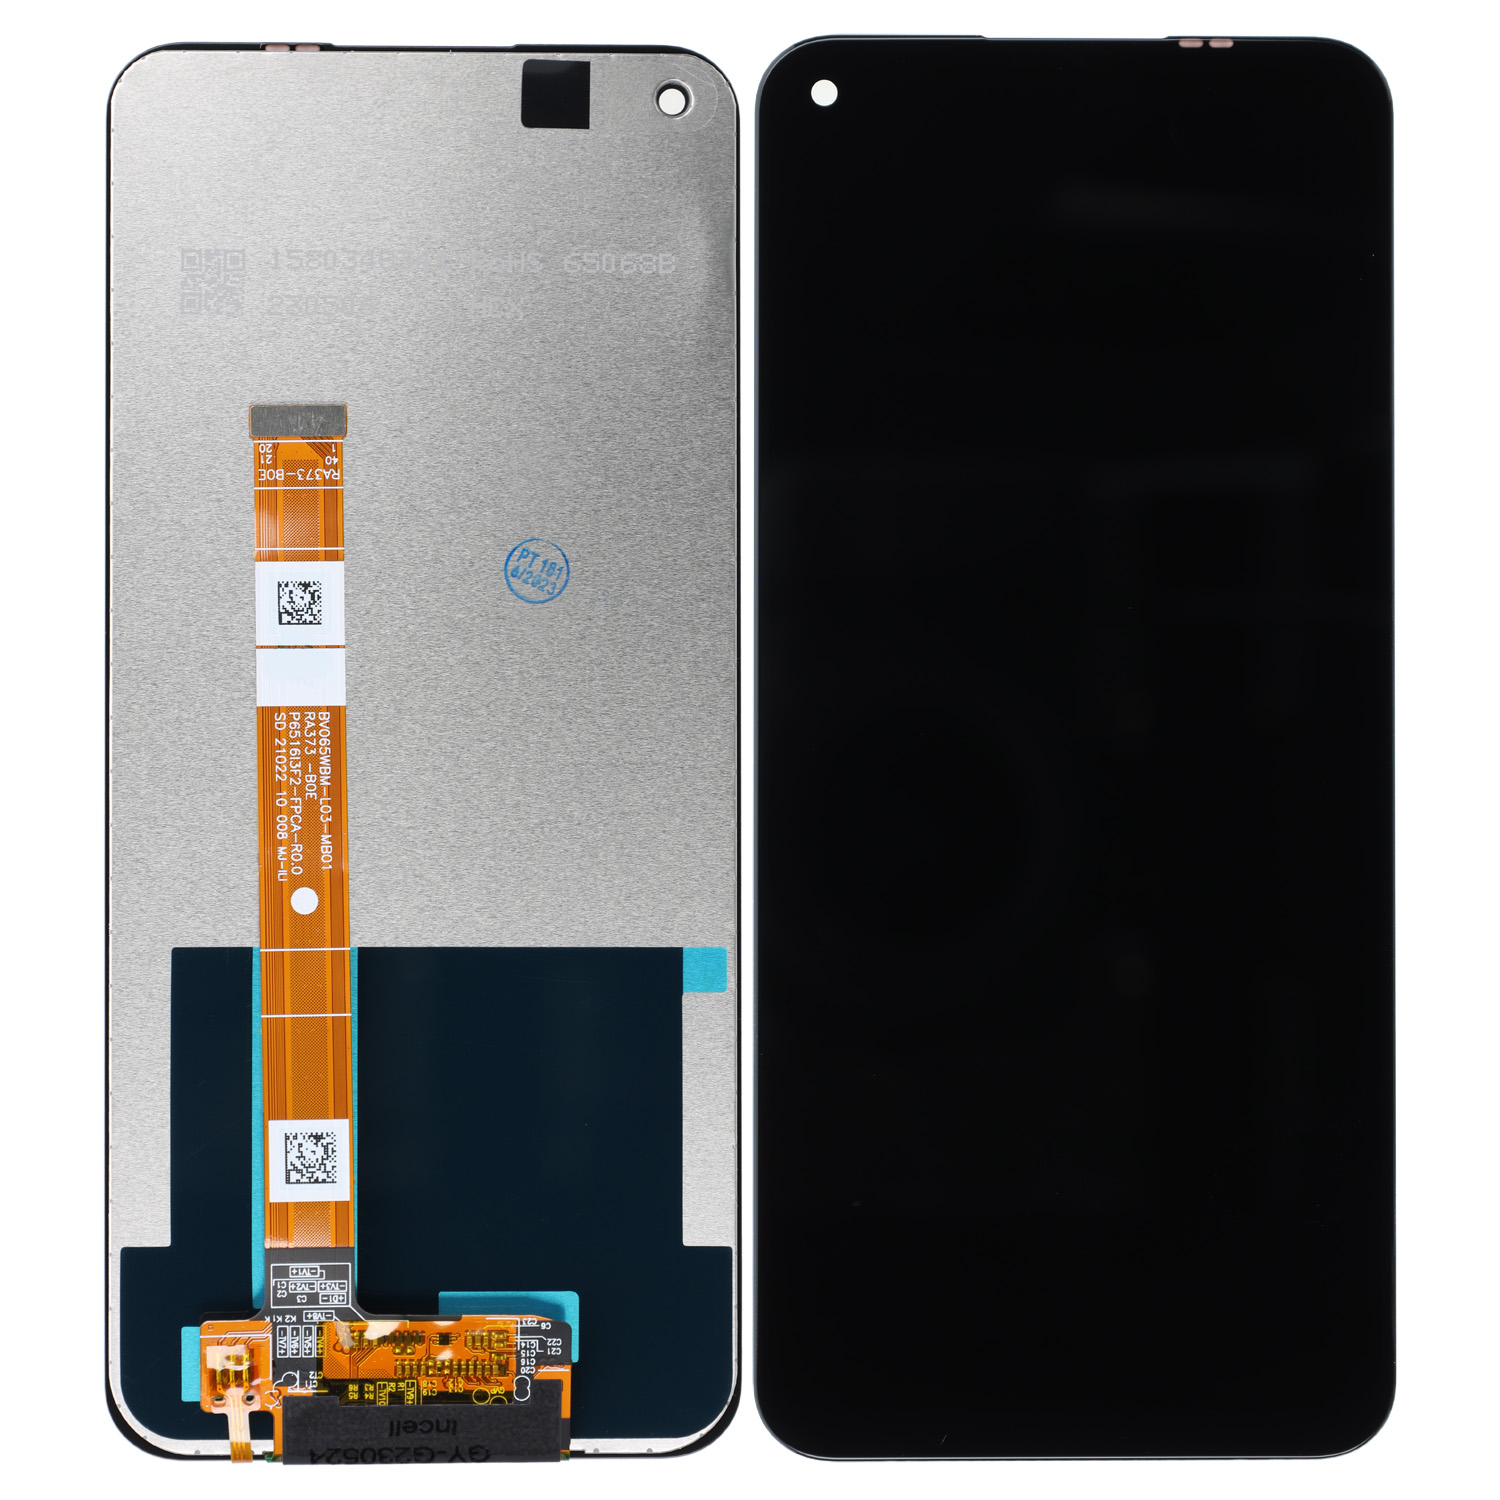 LCD Display compatible to Oppo A53 / A53s / A32 / A33, A11S without Frame